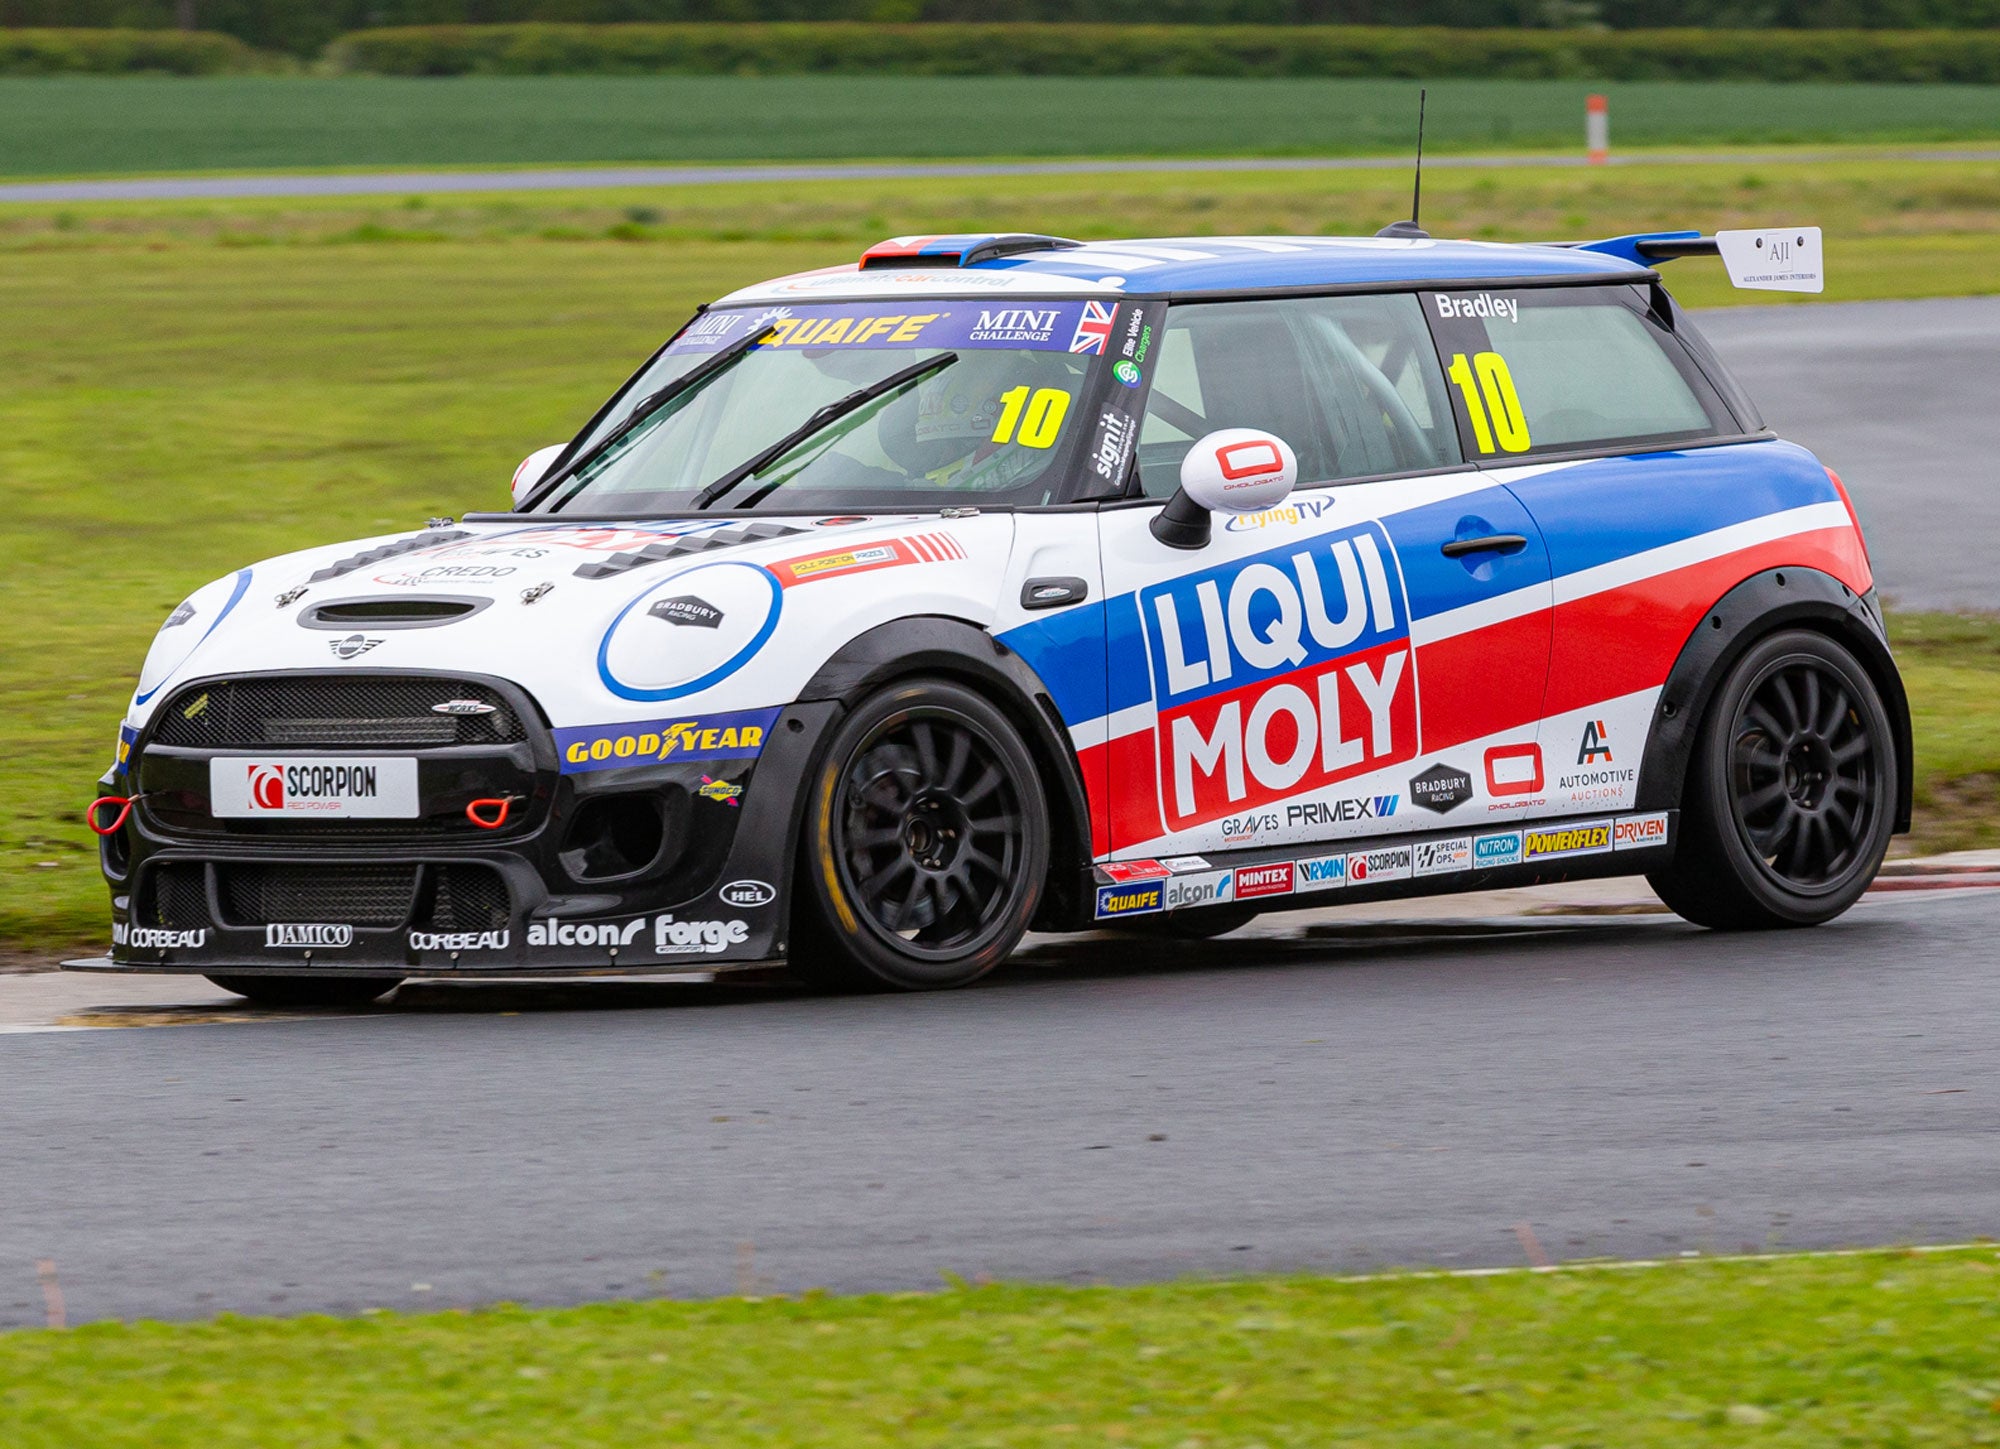 Bradley Gravett son of BTCC British Touring Car Champion Robb Gravett in the MINI Challenge JCW Series at Croft in 2021 Tyre Test Complex Right Graves Motorsport Cooper Racing Driver LIQUI MOLY LM Performance Thinking it Better 2